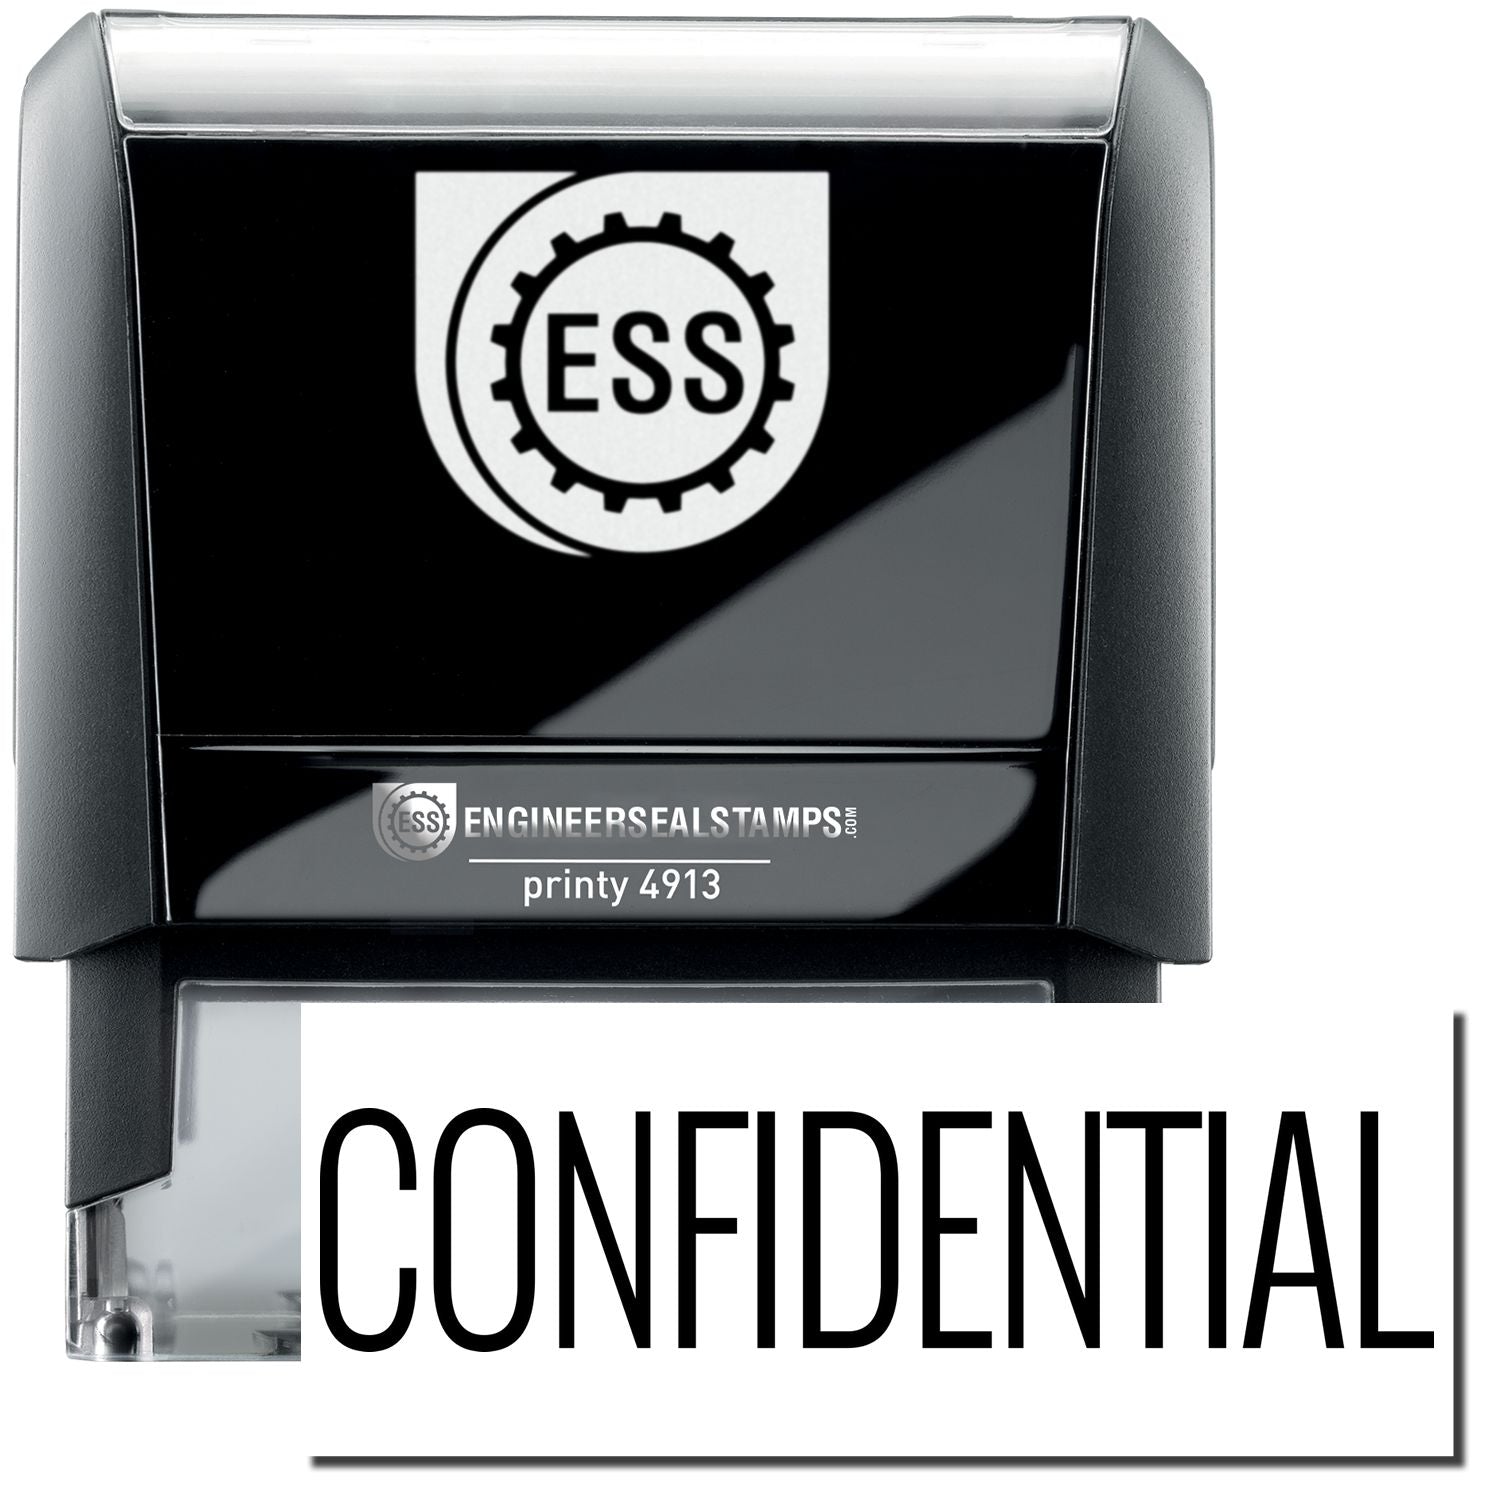 A self-inking stamp with a stamped image showing how the text "CONFIDENTIAL" in a large narrow font is displayed by it after stamping.